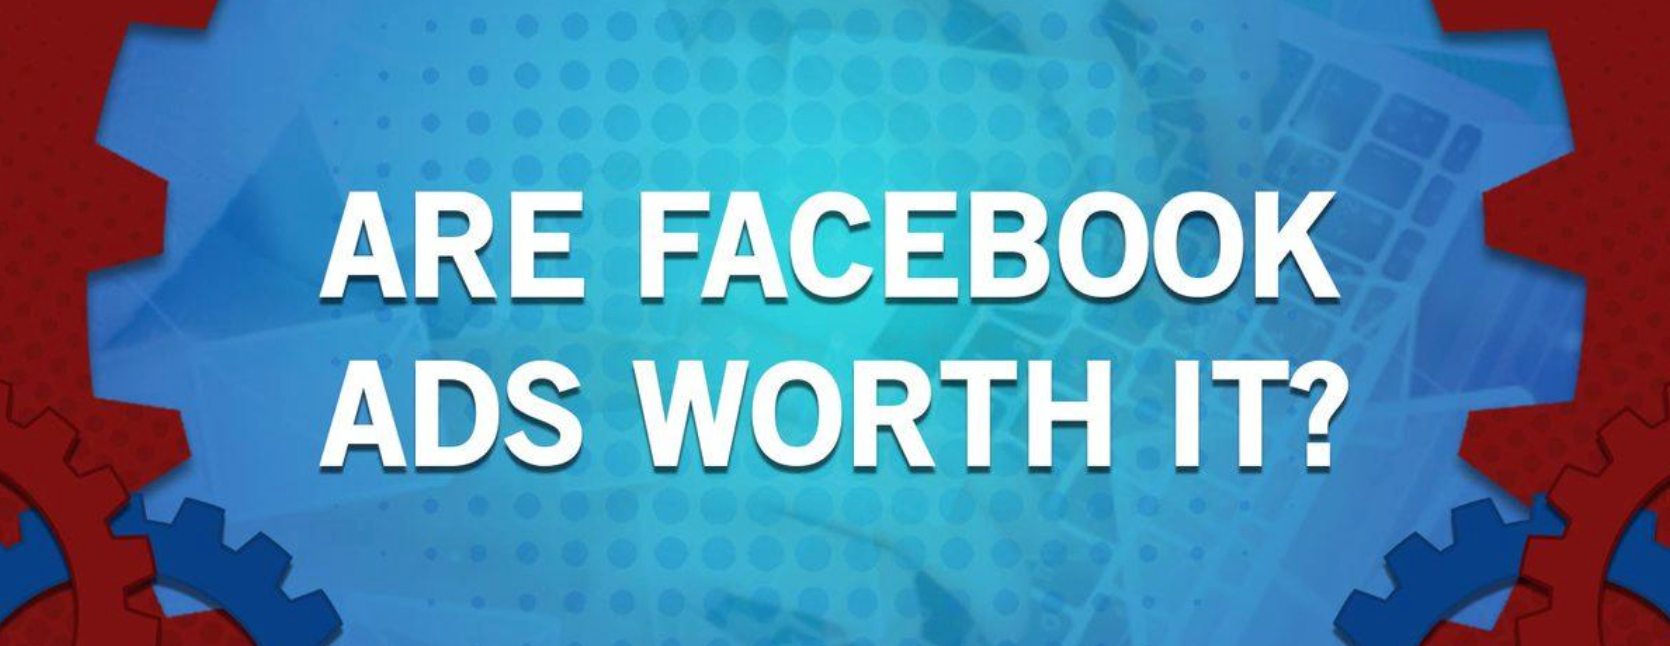 Are facebook ads worth it? Visual.ly